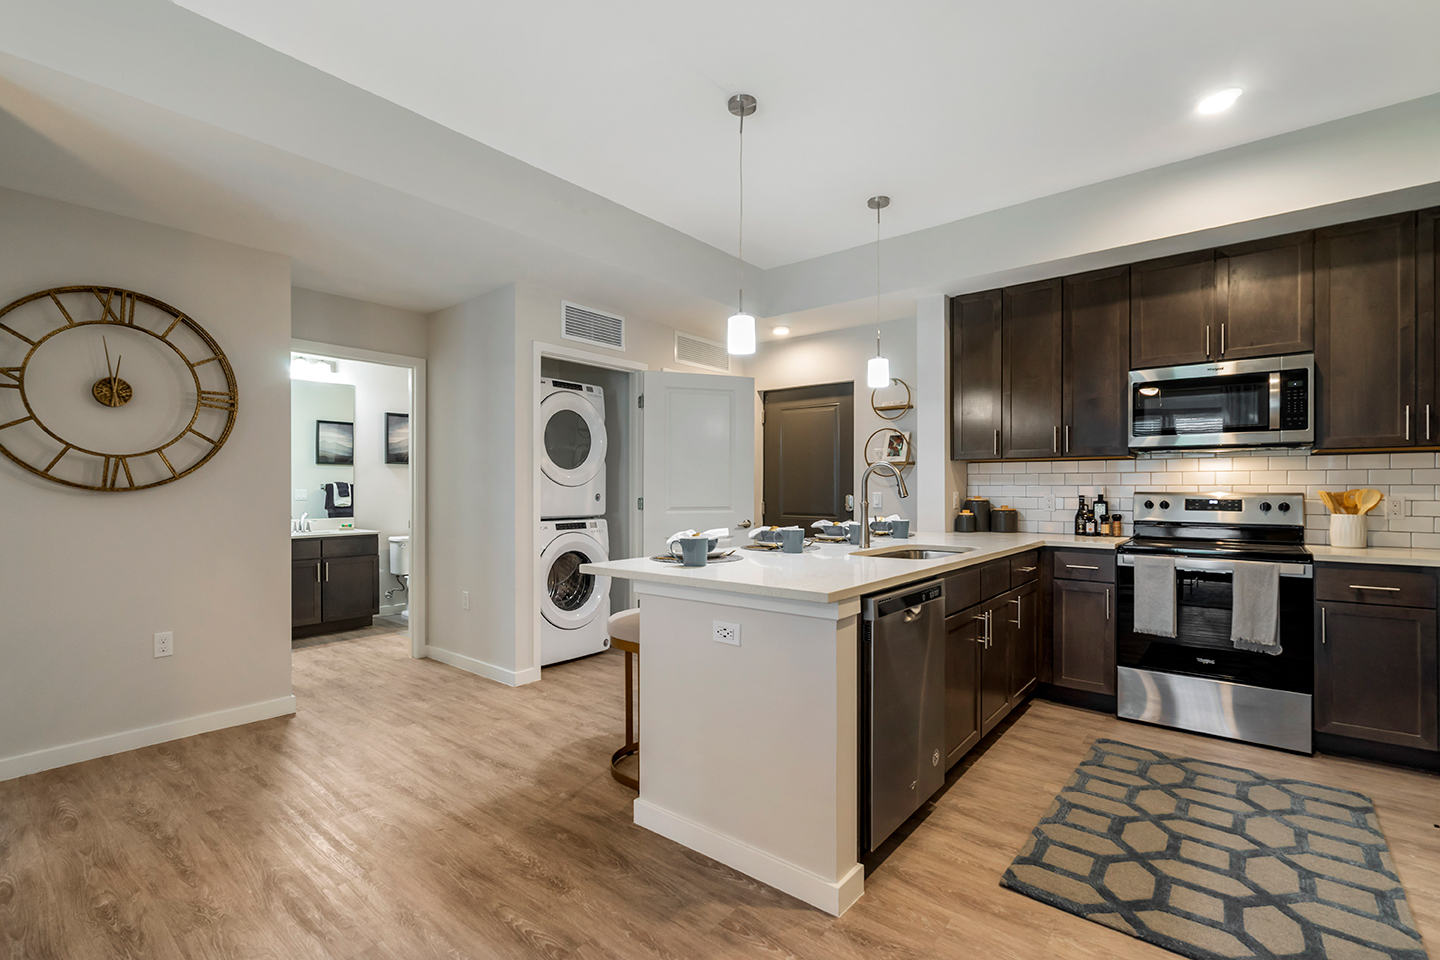 Model apartment kitchen with dark wood cabinets, wood-style plank flooring, and stainless steel appliances with view of washer and dryer machines